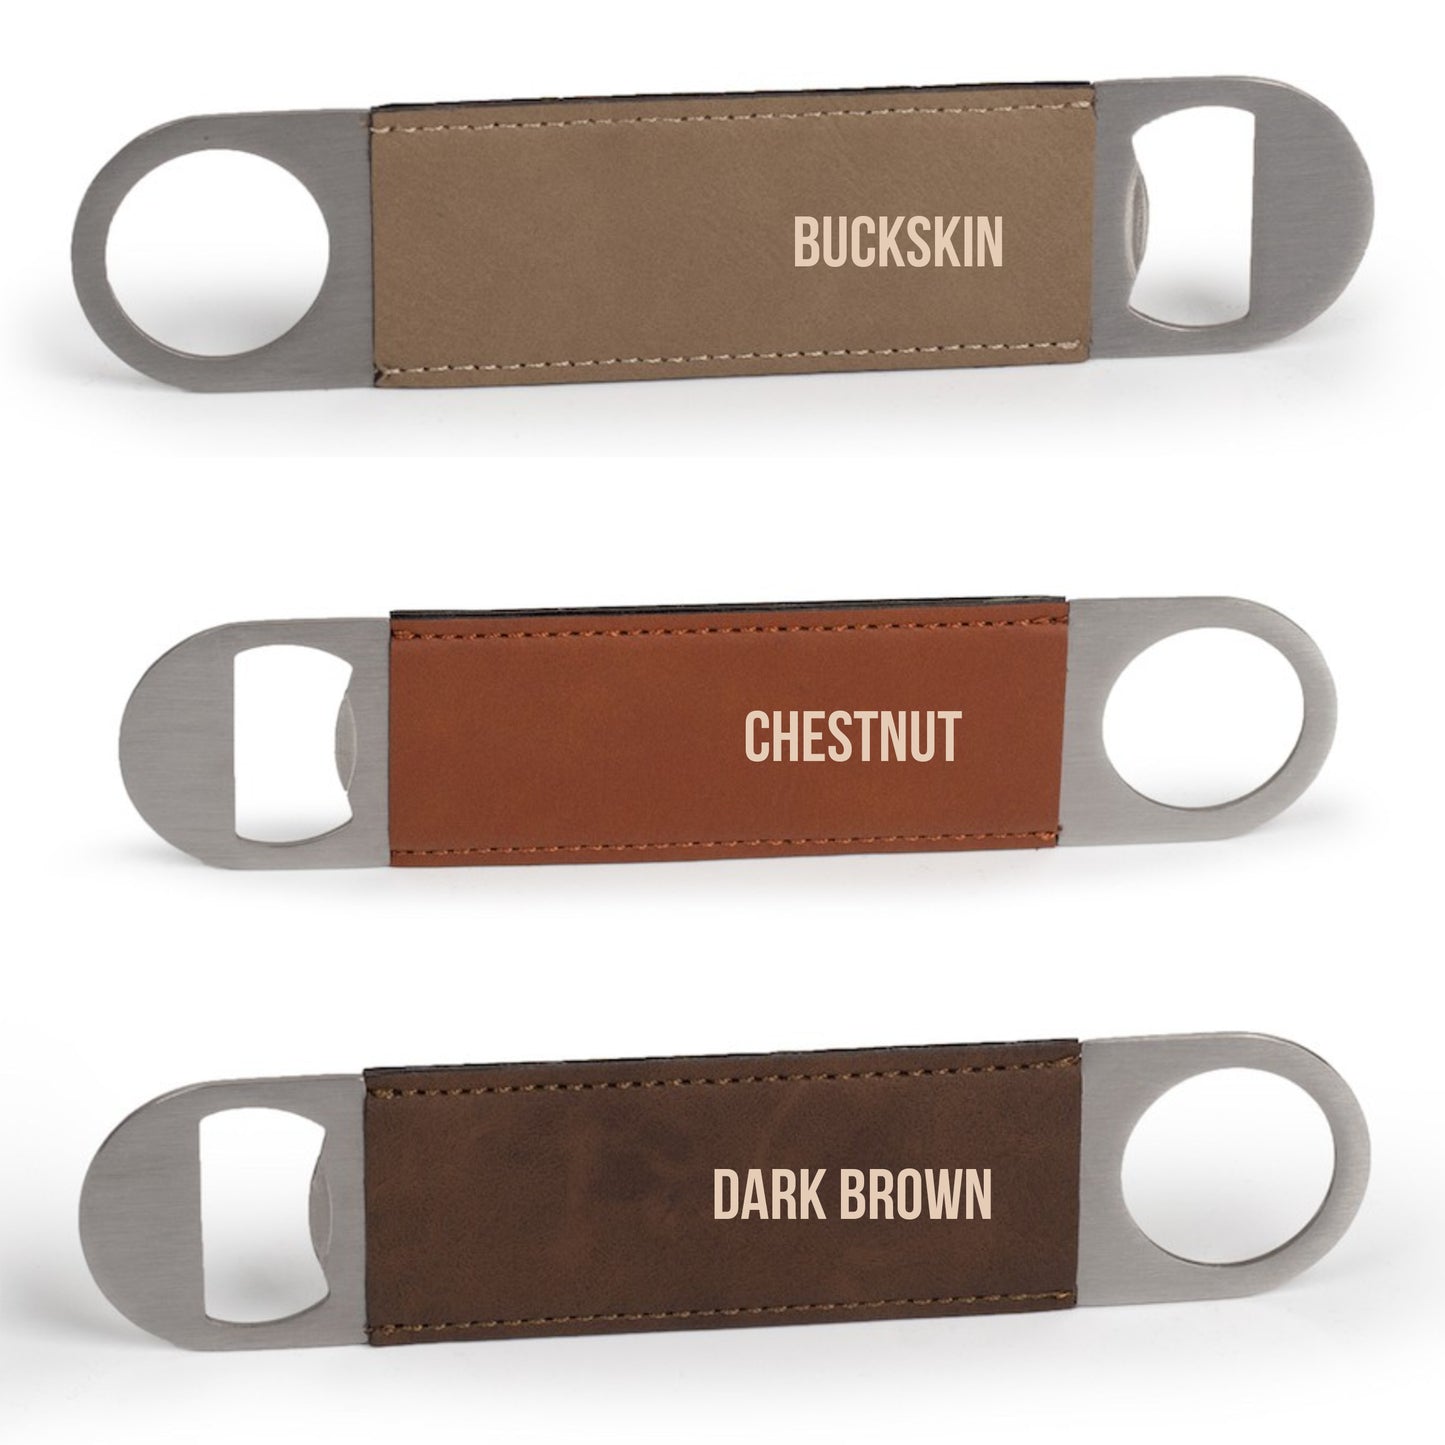 Custom engraved leatherette bottle opener for Graduates, Guys, Grooms, Father's Day gift